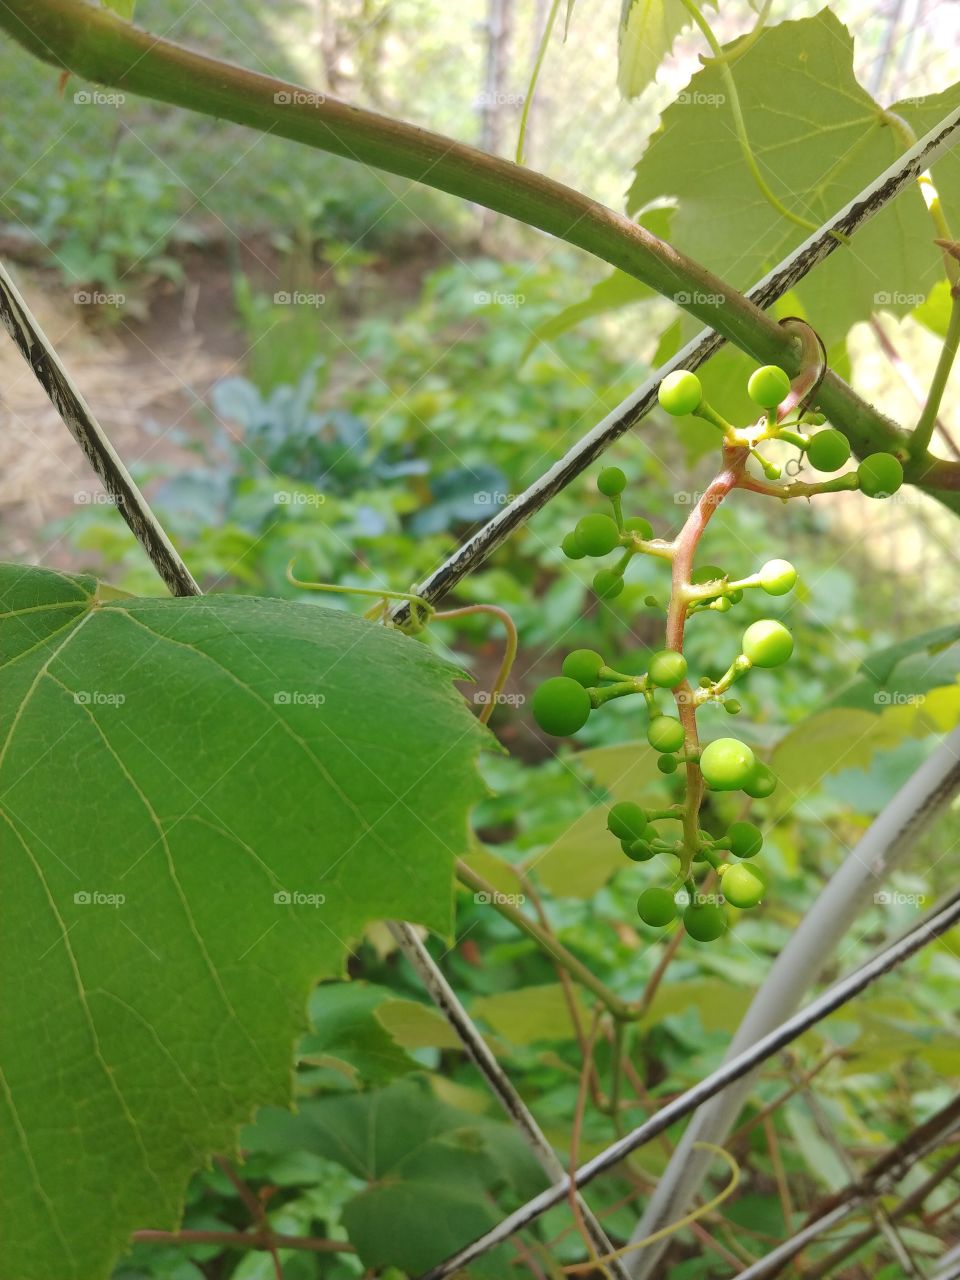 the most adorable garden fruit ever. these are baby grapes grown in this years garden in new York!